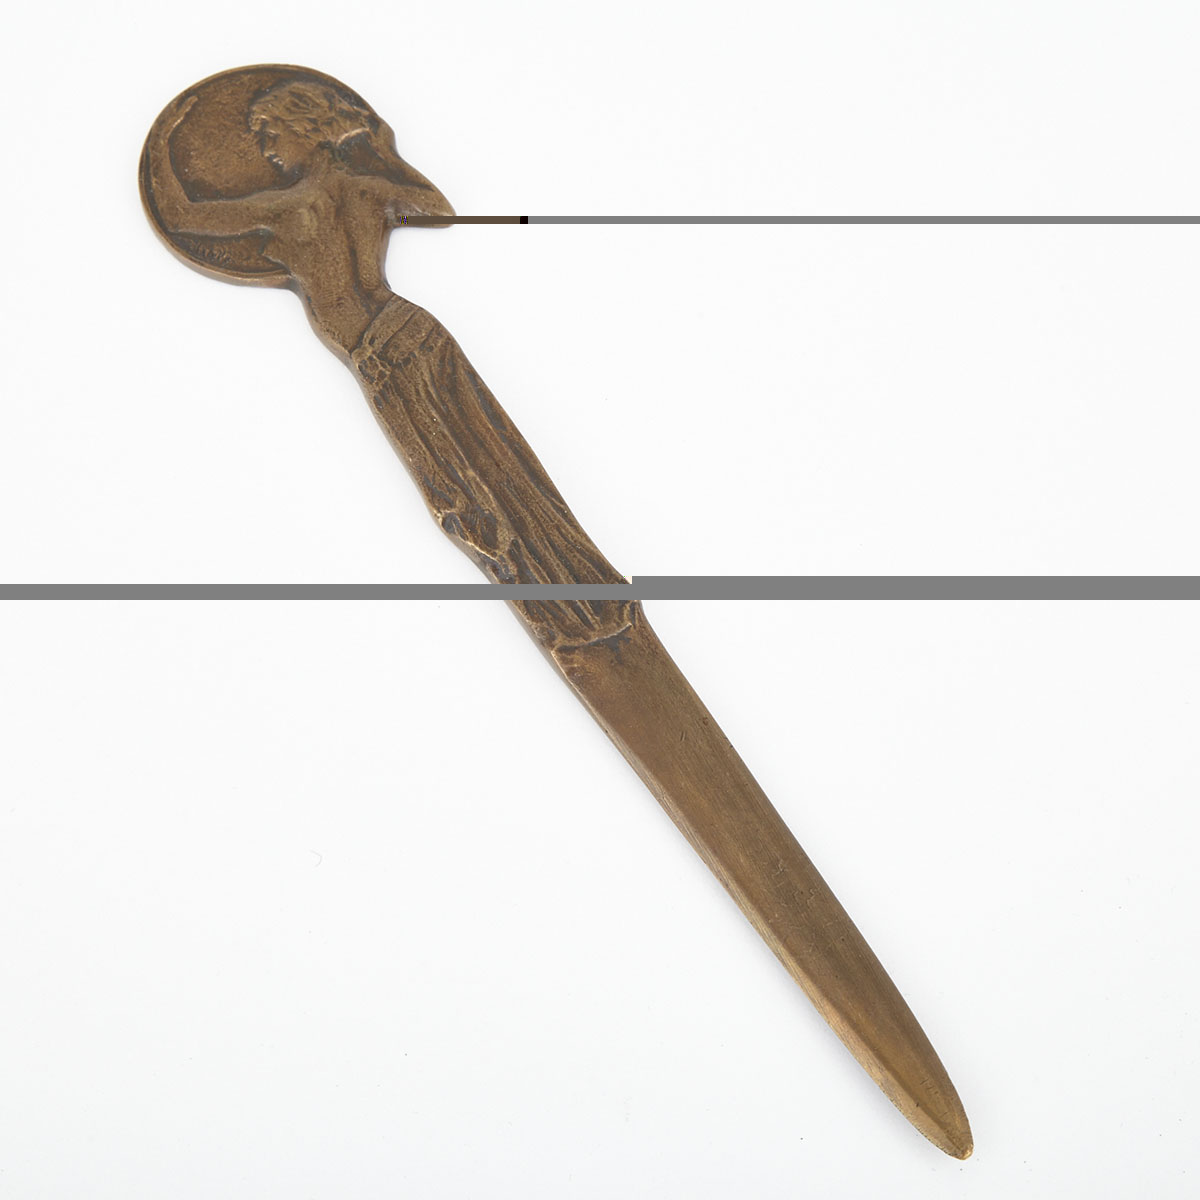 FLORENCE WYLE, O.S.A., R.C.A., (Canadian, 1881-1968) Bronze Figural Letter Opener, early 20th century